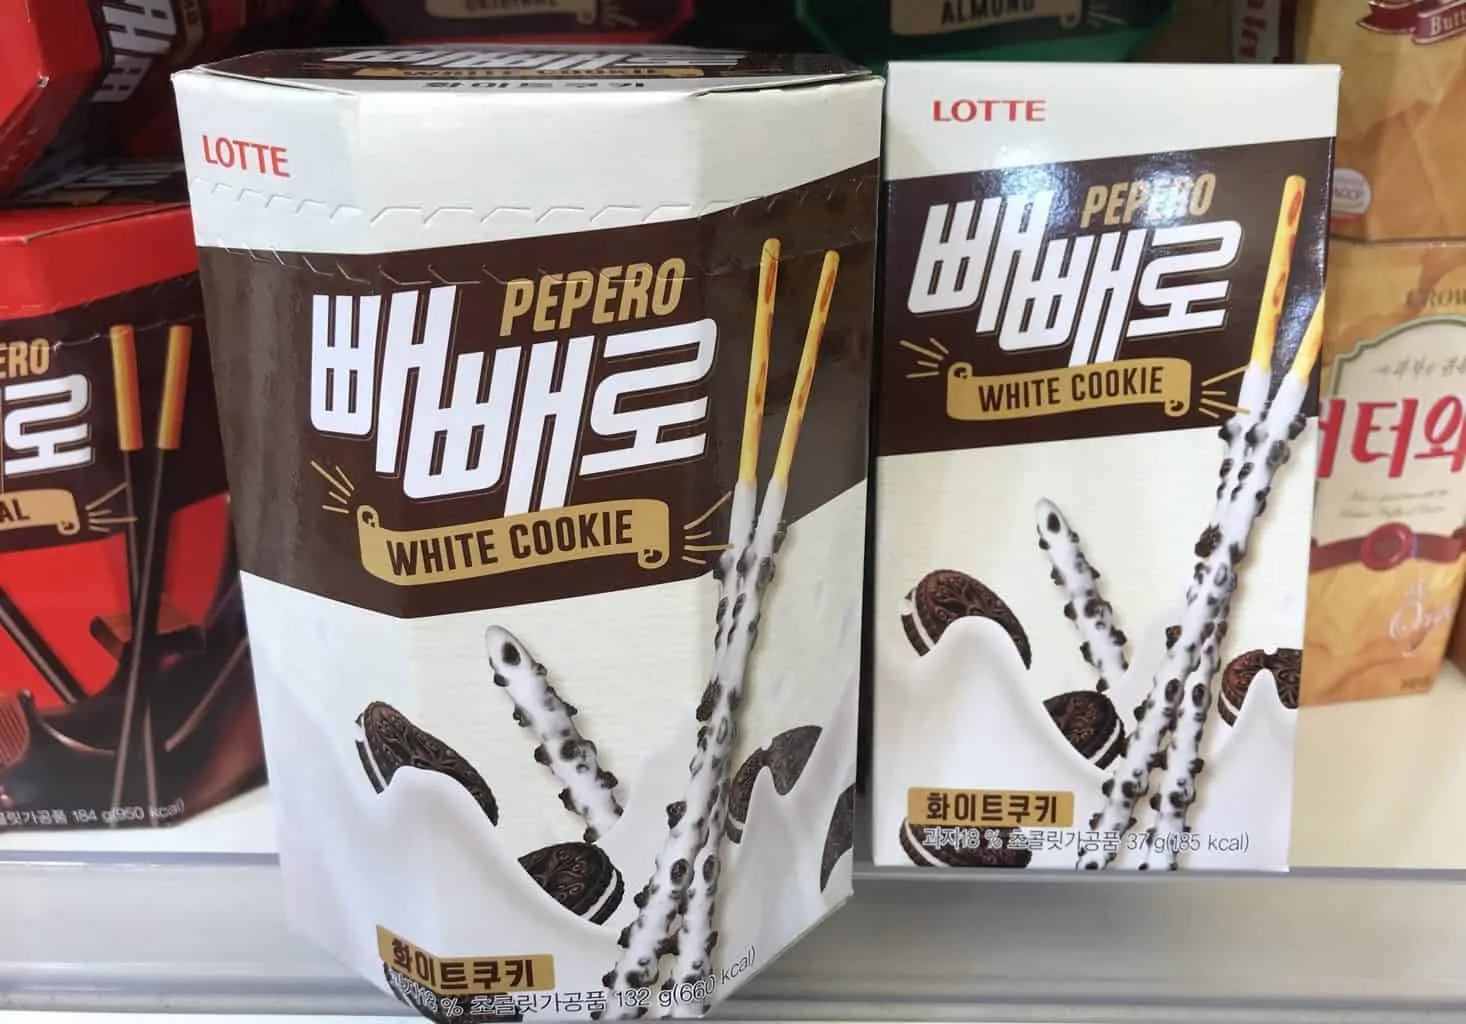 Two styles of boxes of Lotte Pepero White Cookie at Seoul Supermarket